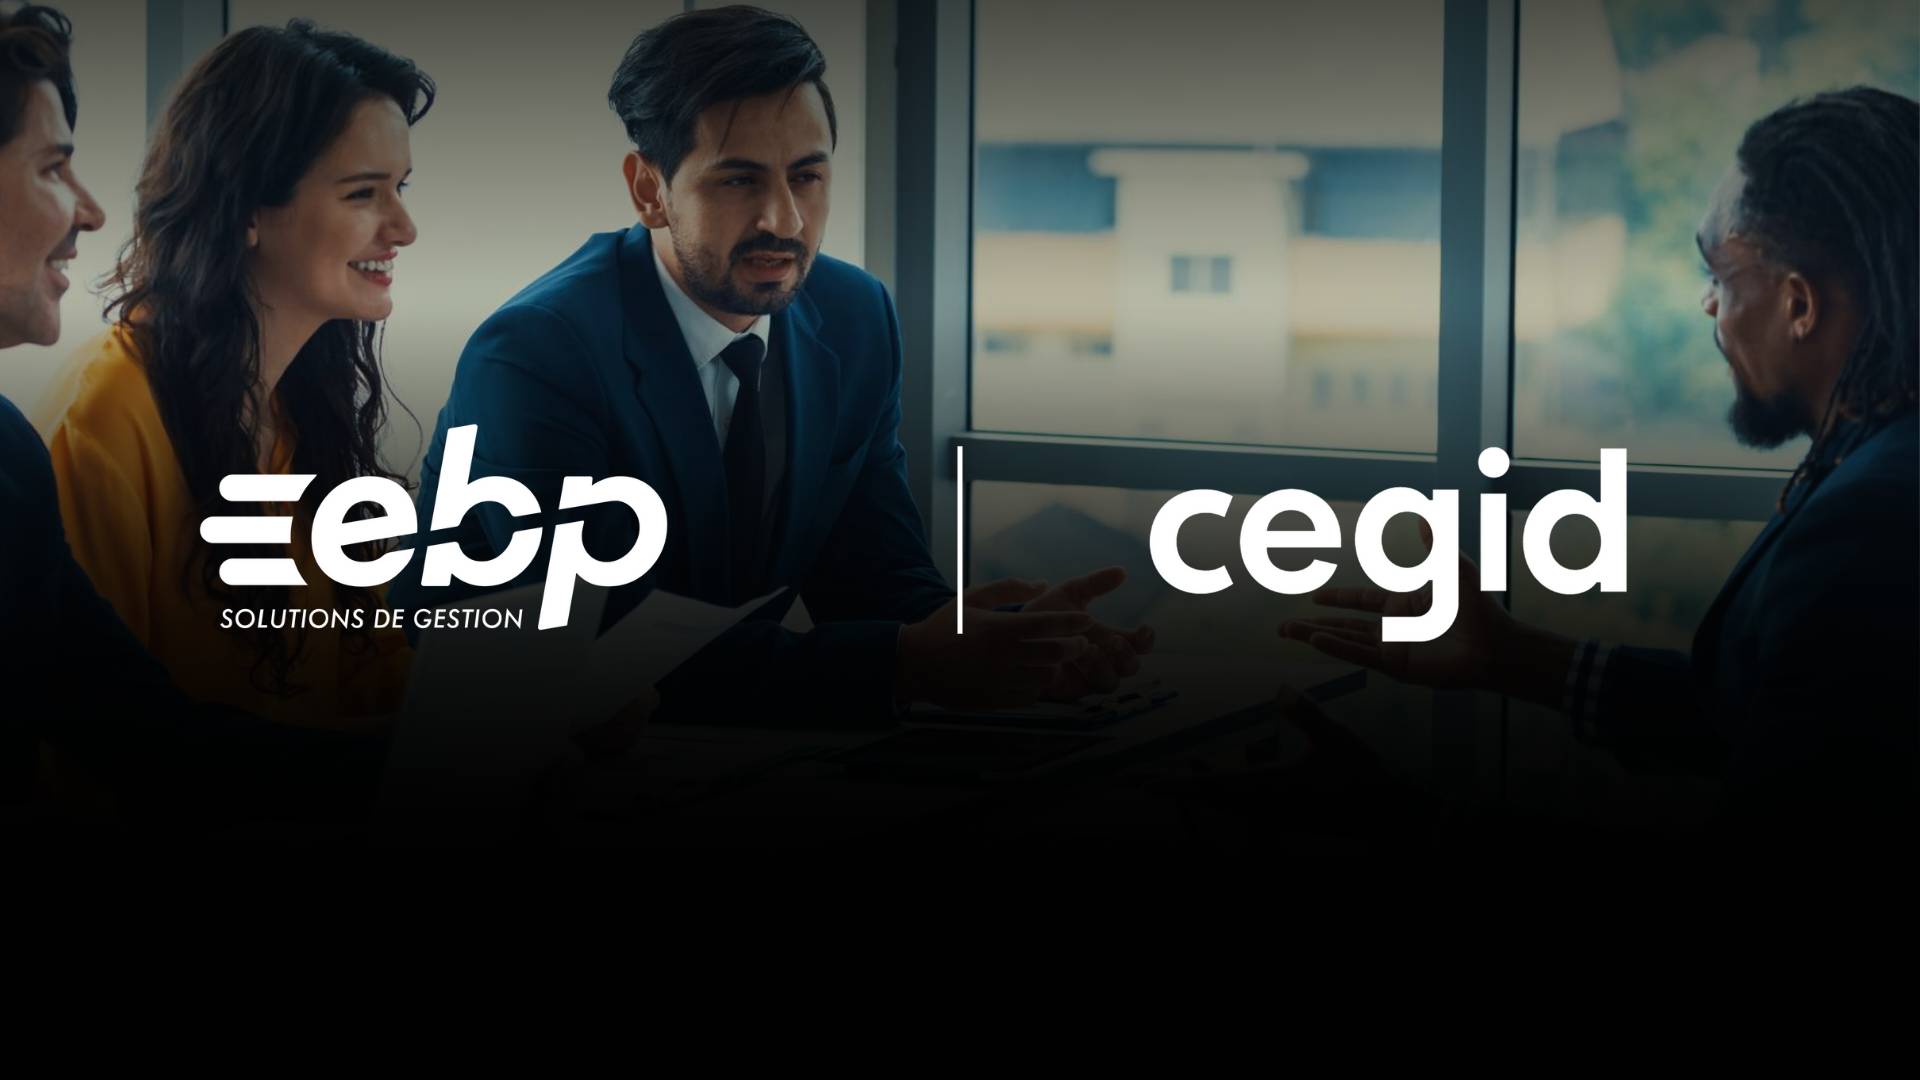 Cegid Announces Potential Acquisition of EBP to Strengthen Leadership in Invoicing and Accounting Software for Micro and SMB Segments